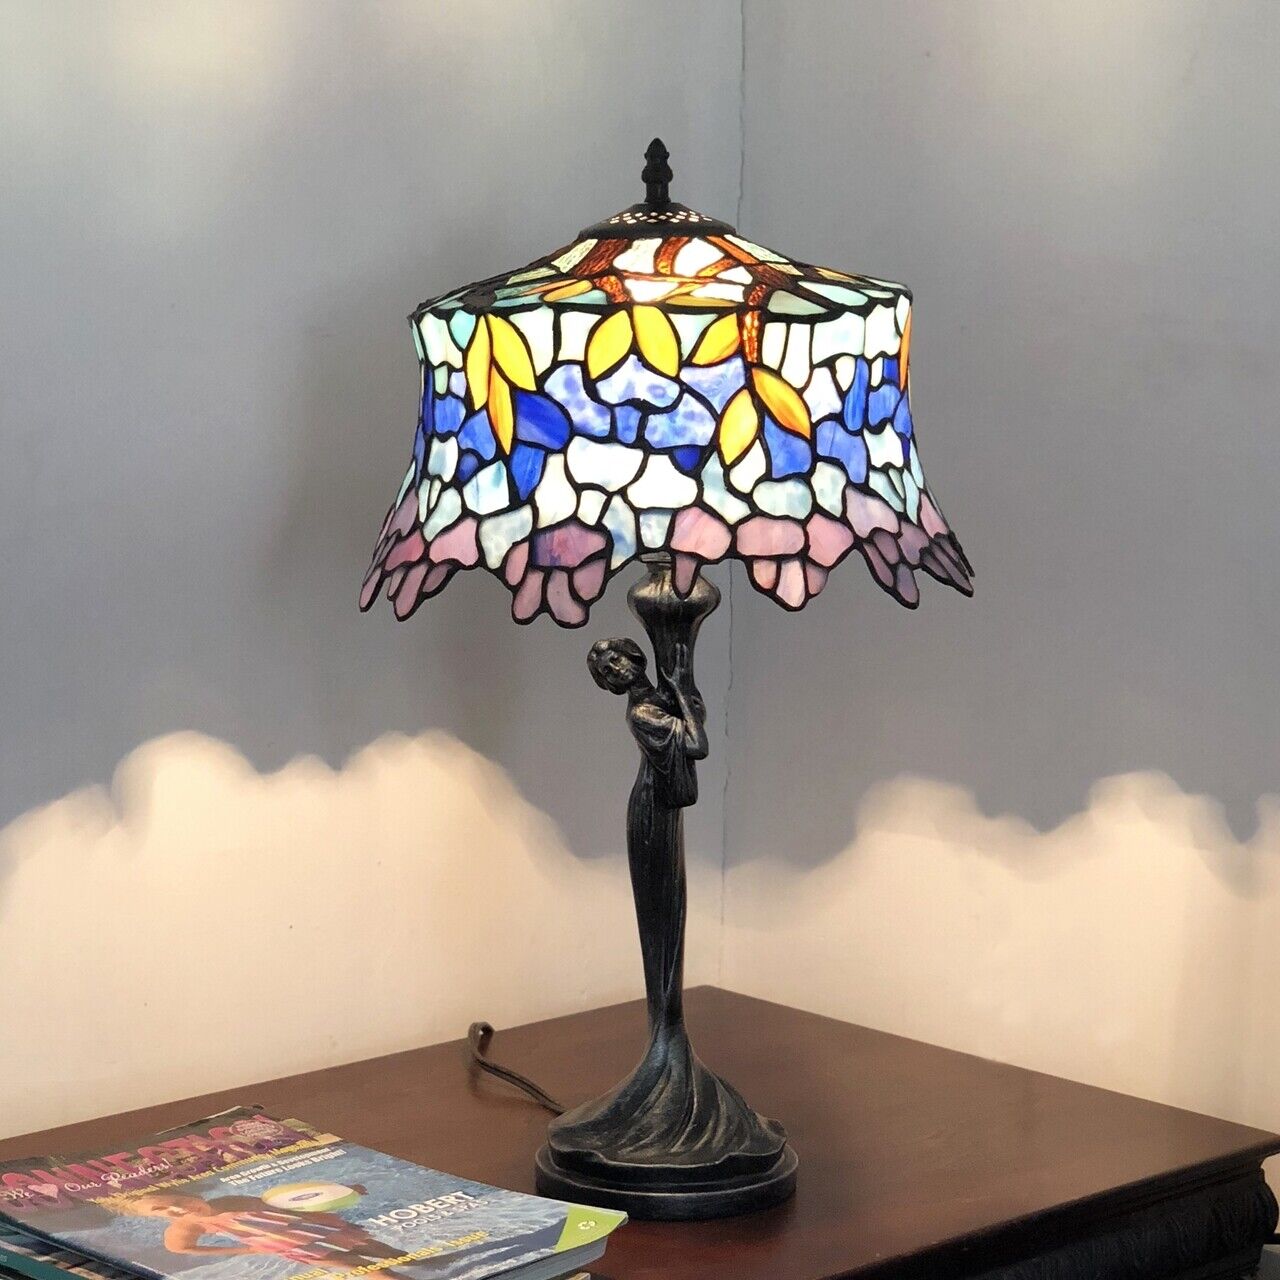 22" Antique Vintage Style Stained Glass Wisteria Floral Table Lamp